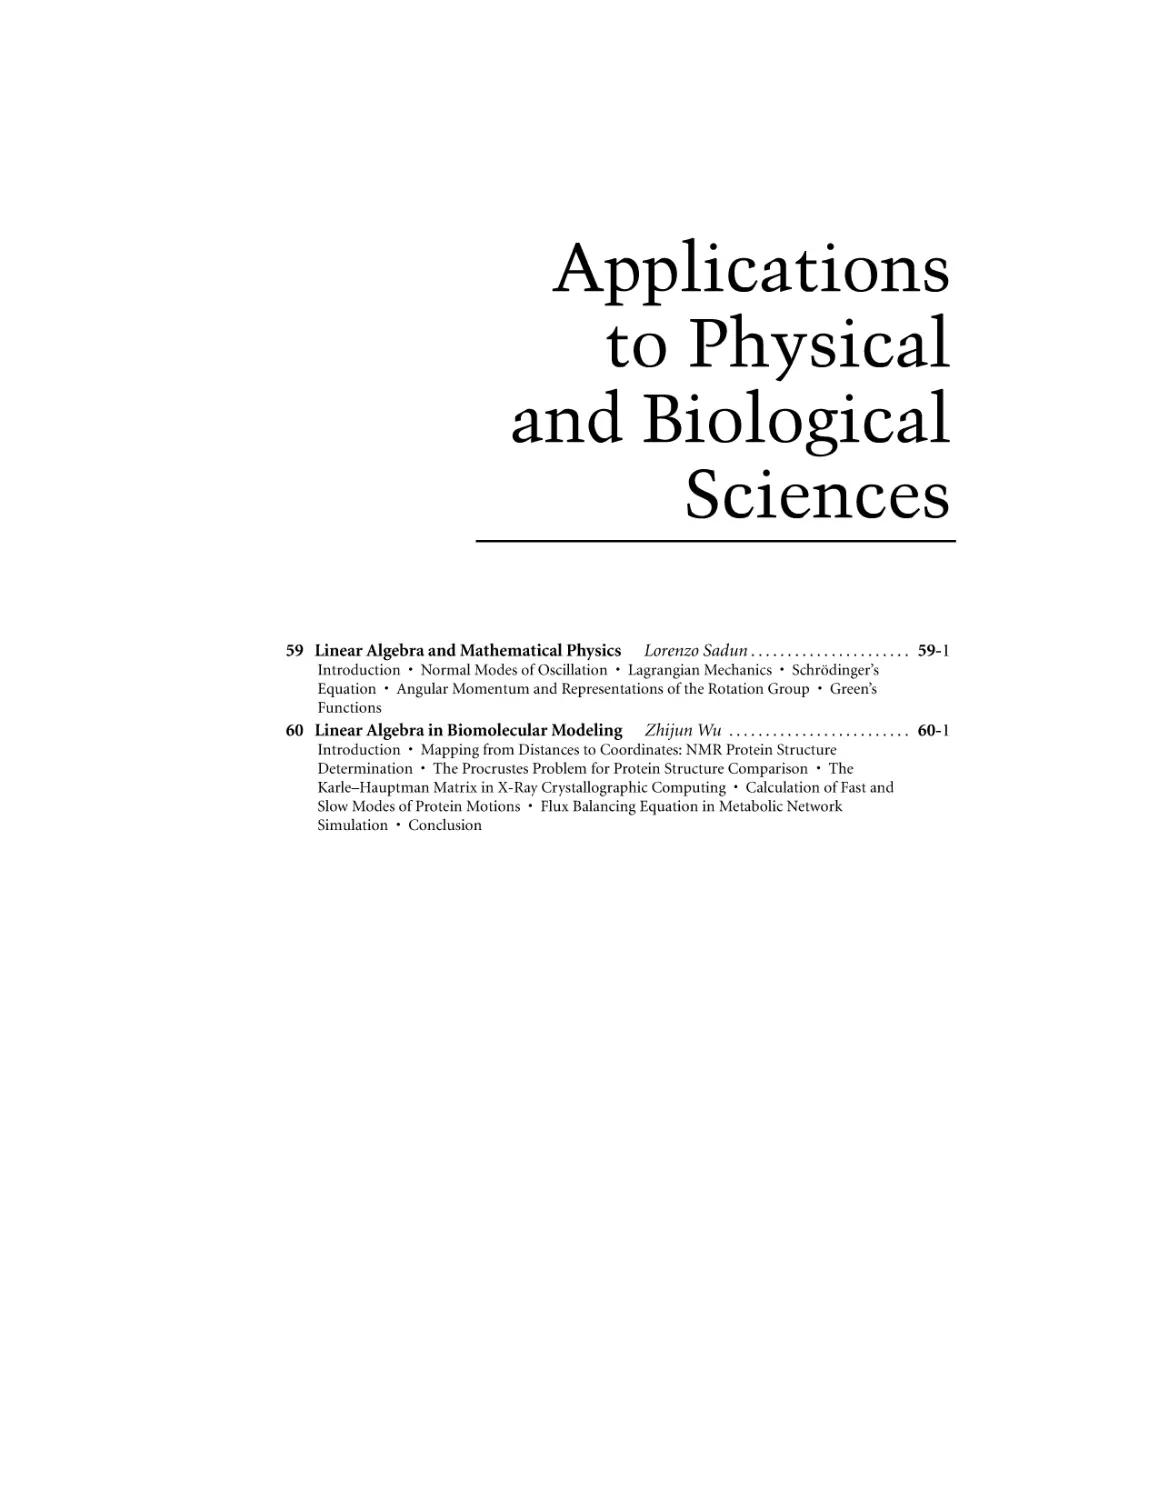 Applications to Physical and Biological Sciences